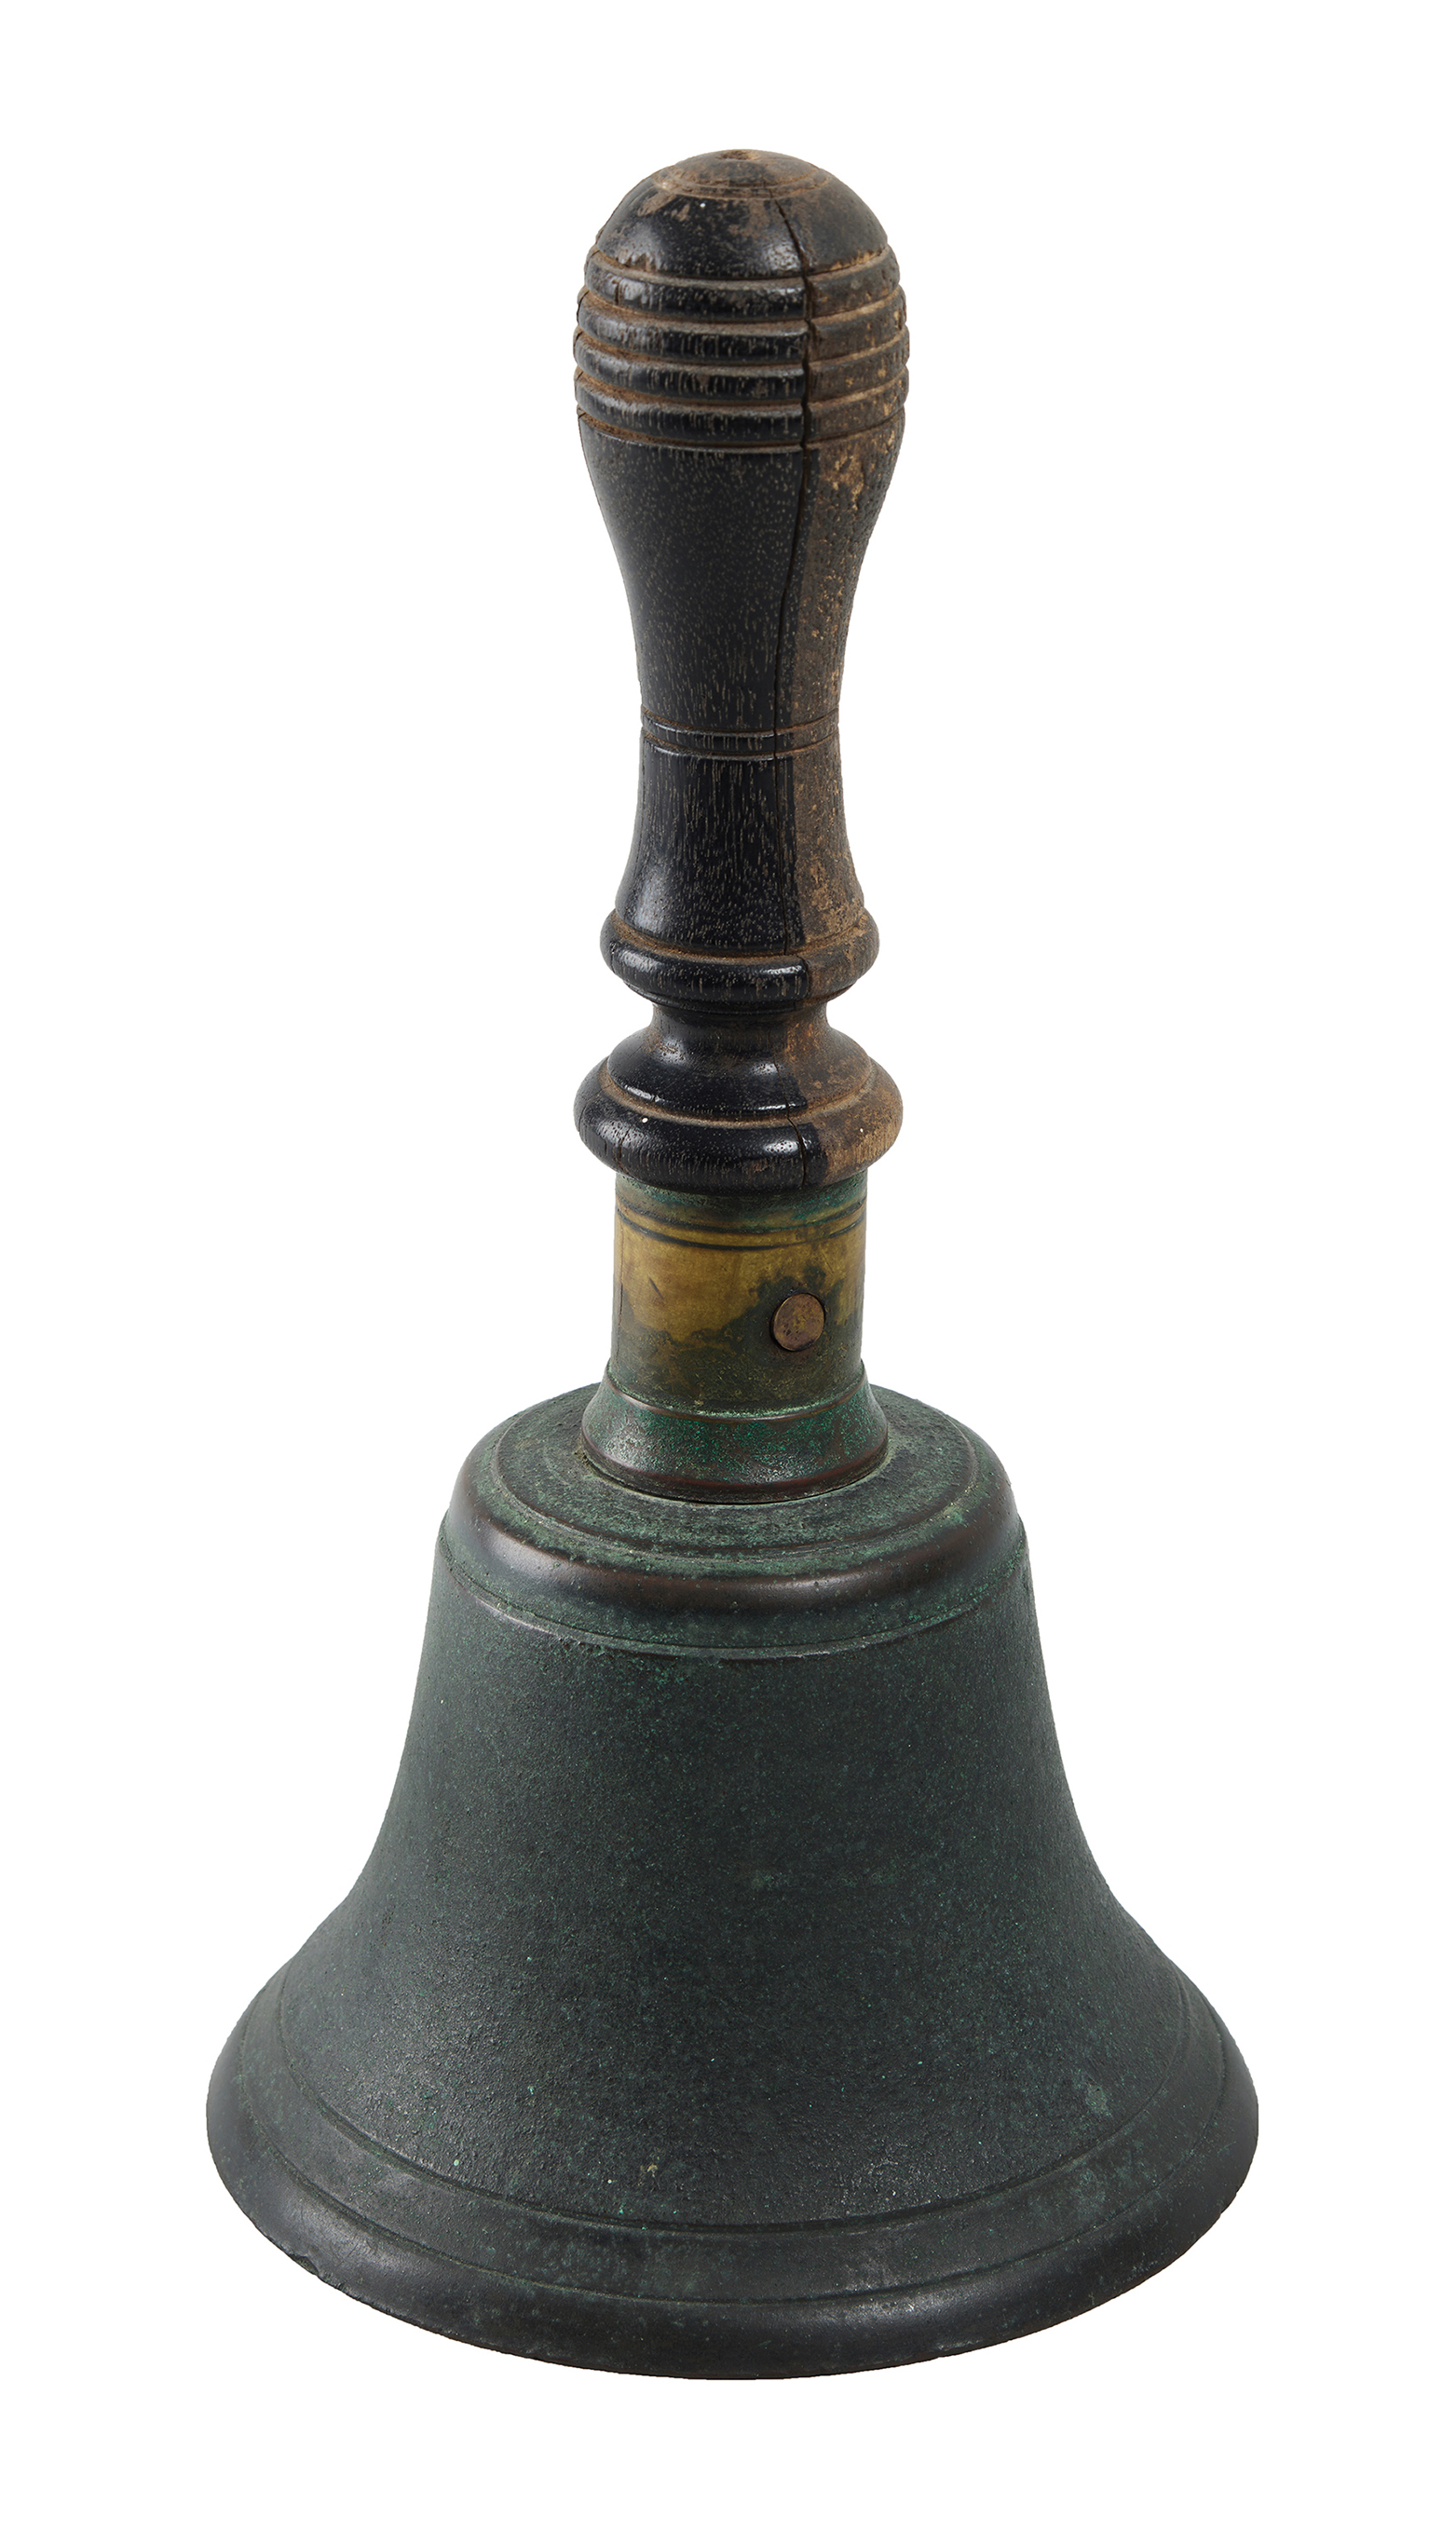 A bronze school bell once used to notify the students the beginning of class